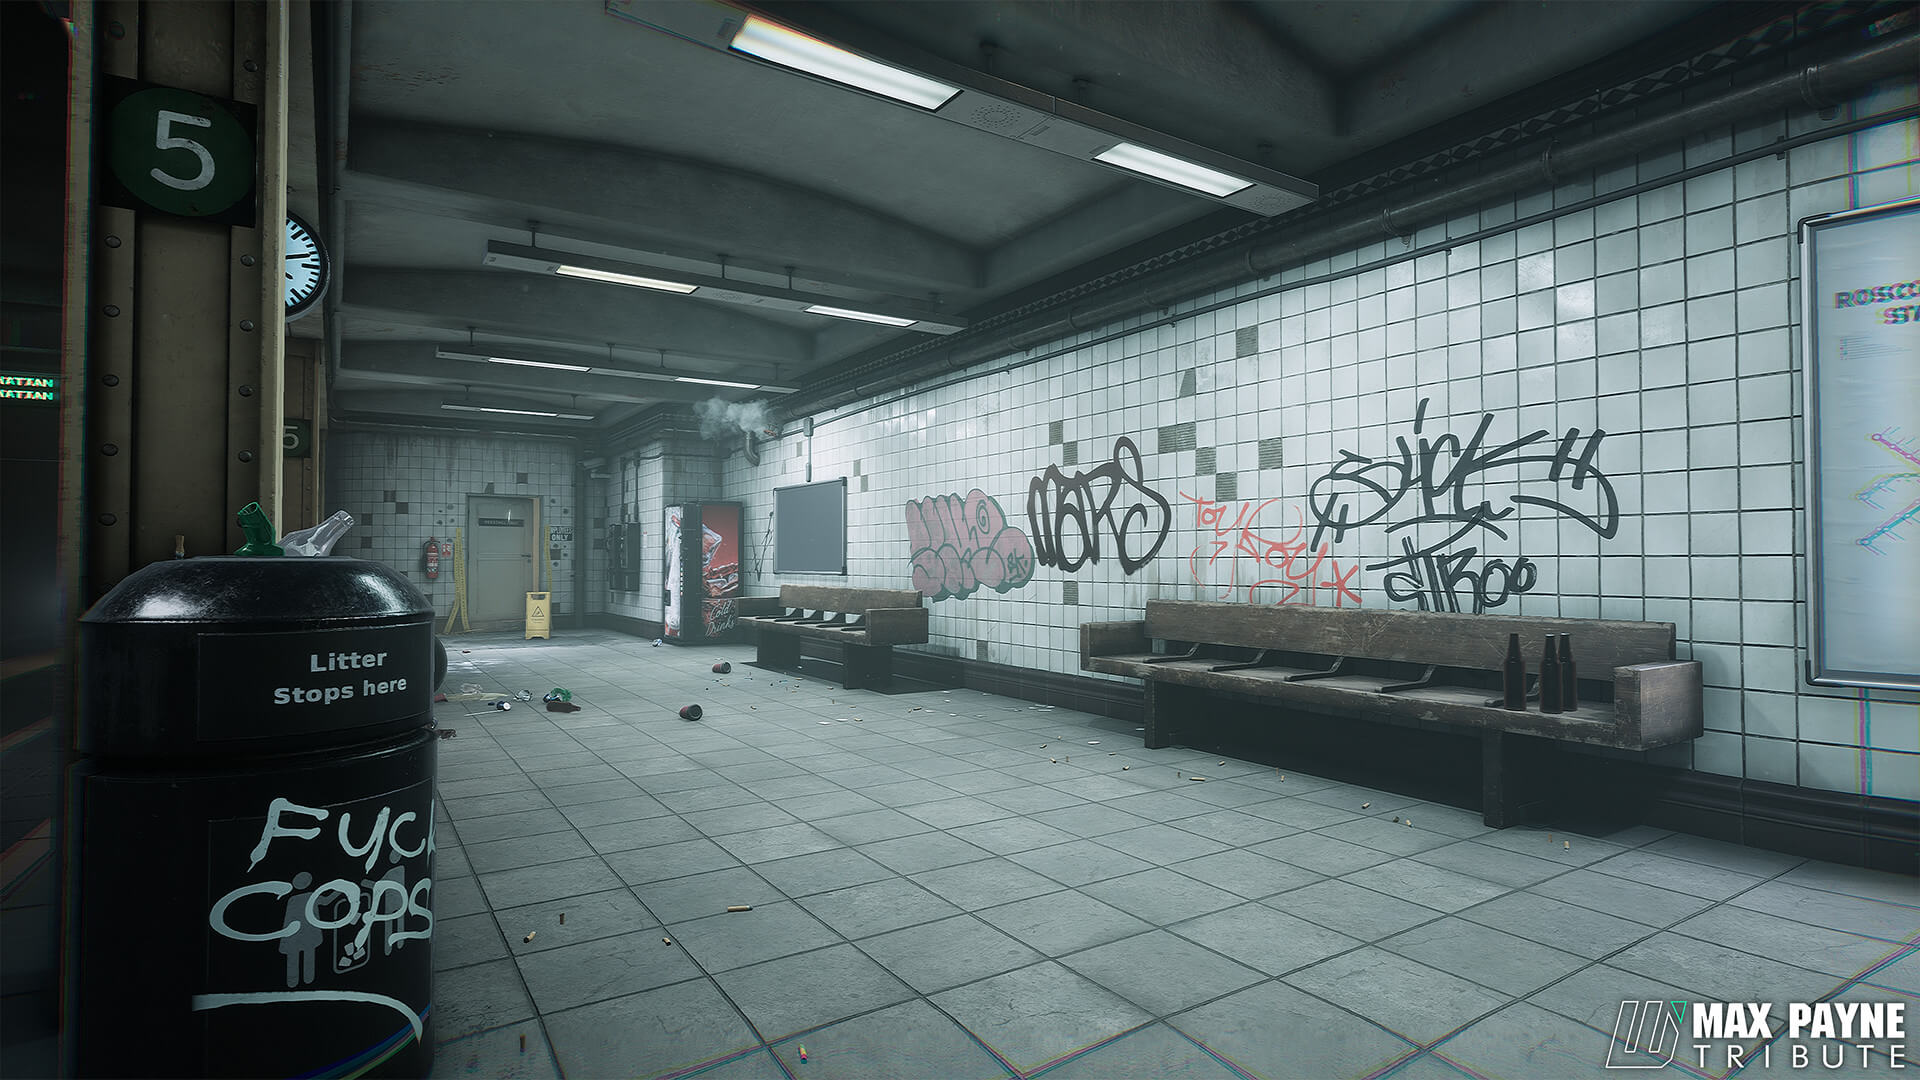 Max Payne 2 Unreal Engine 5 Recreation Looks Great in New Concept Trailer